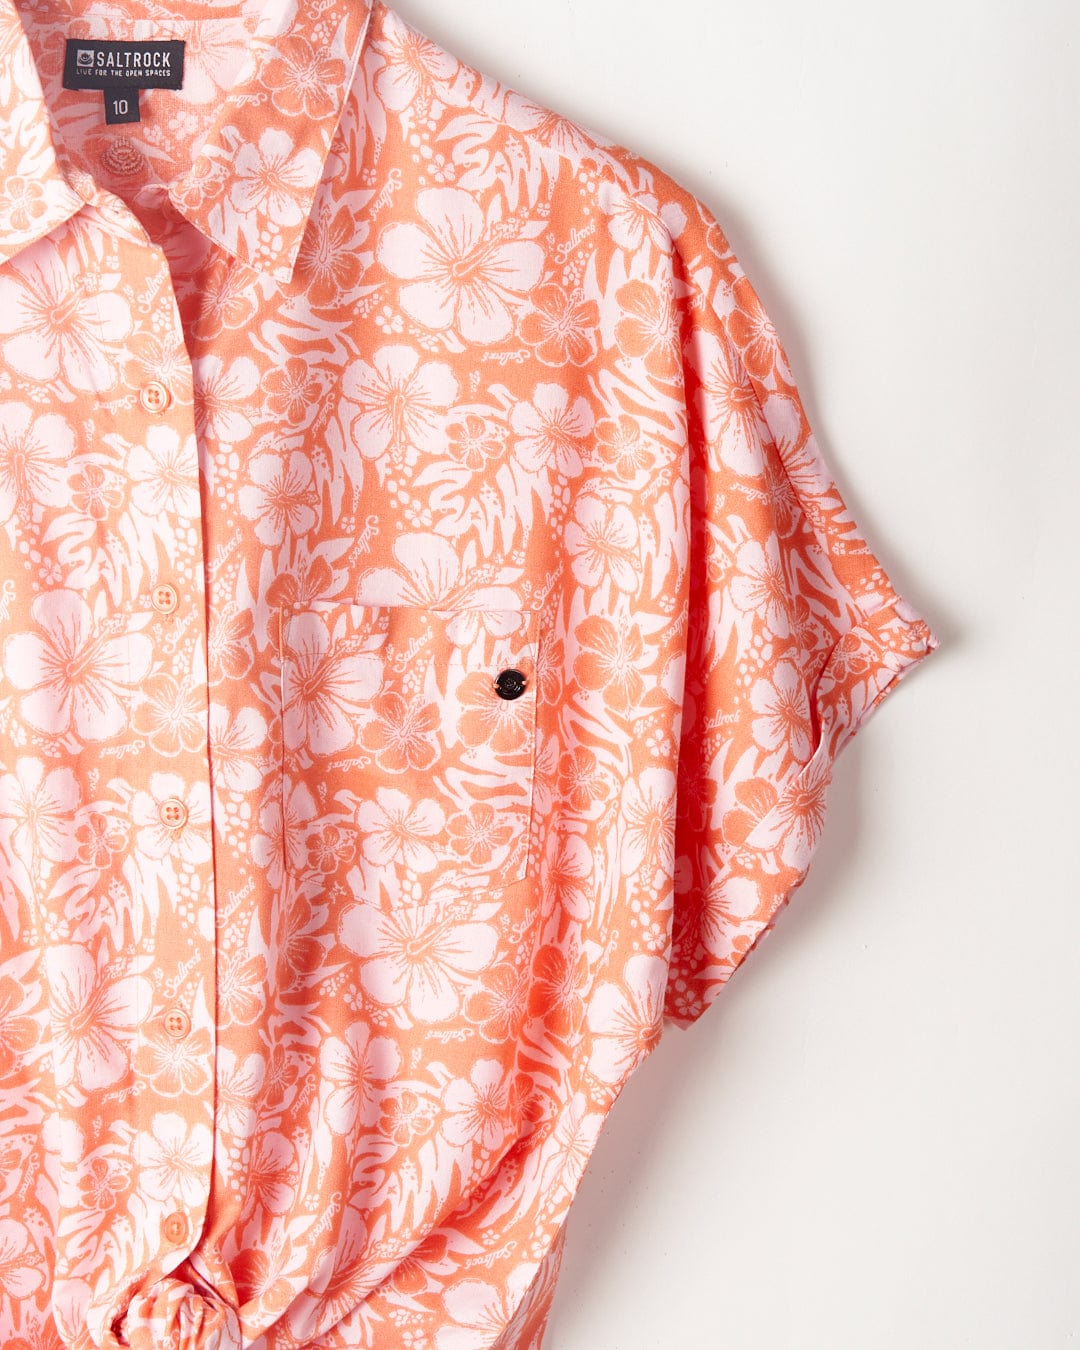 A close-up of a coral-colored hibiscus floral print shirt with a black button, displaying the label "Saltrock" at the collar.